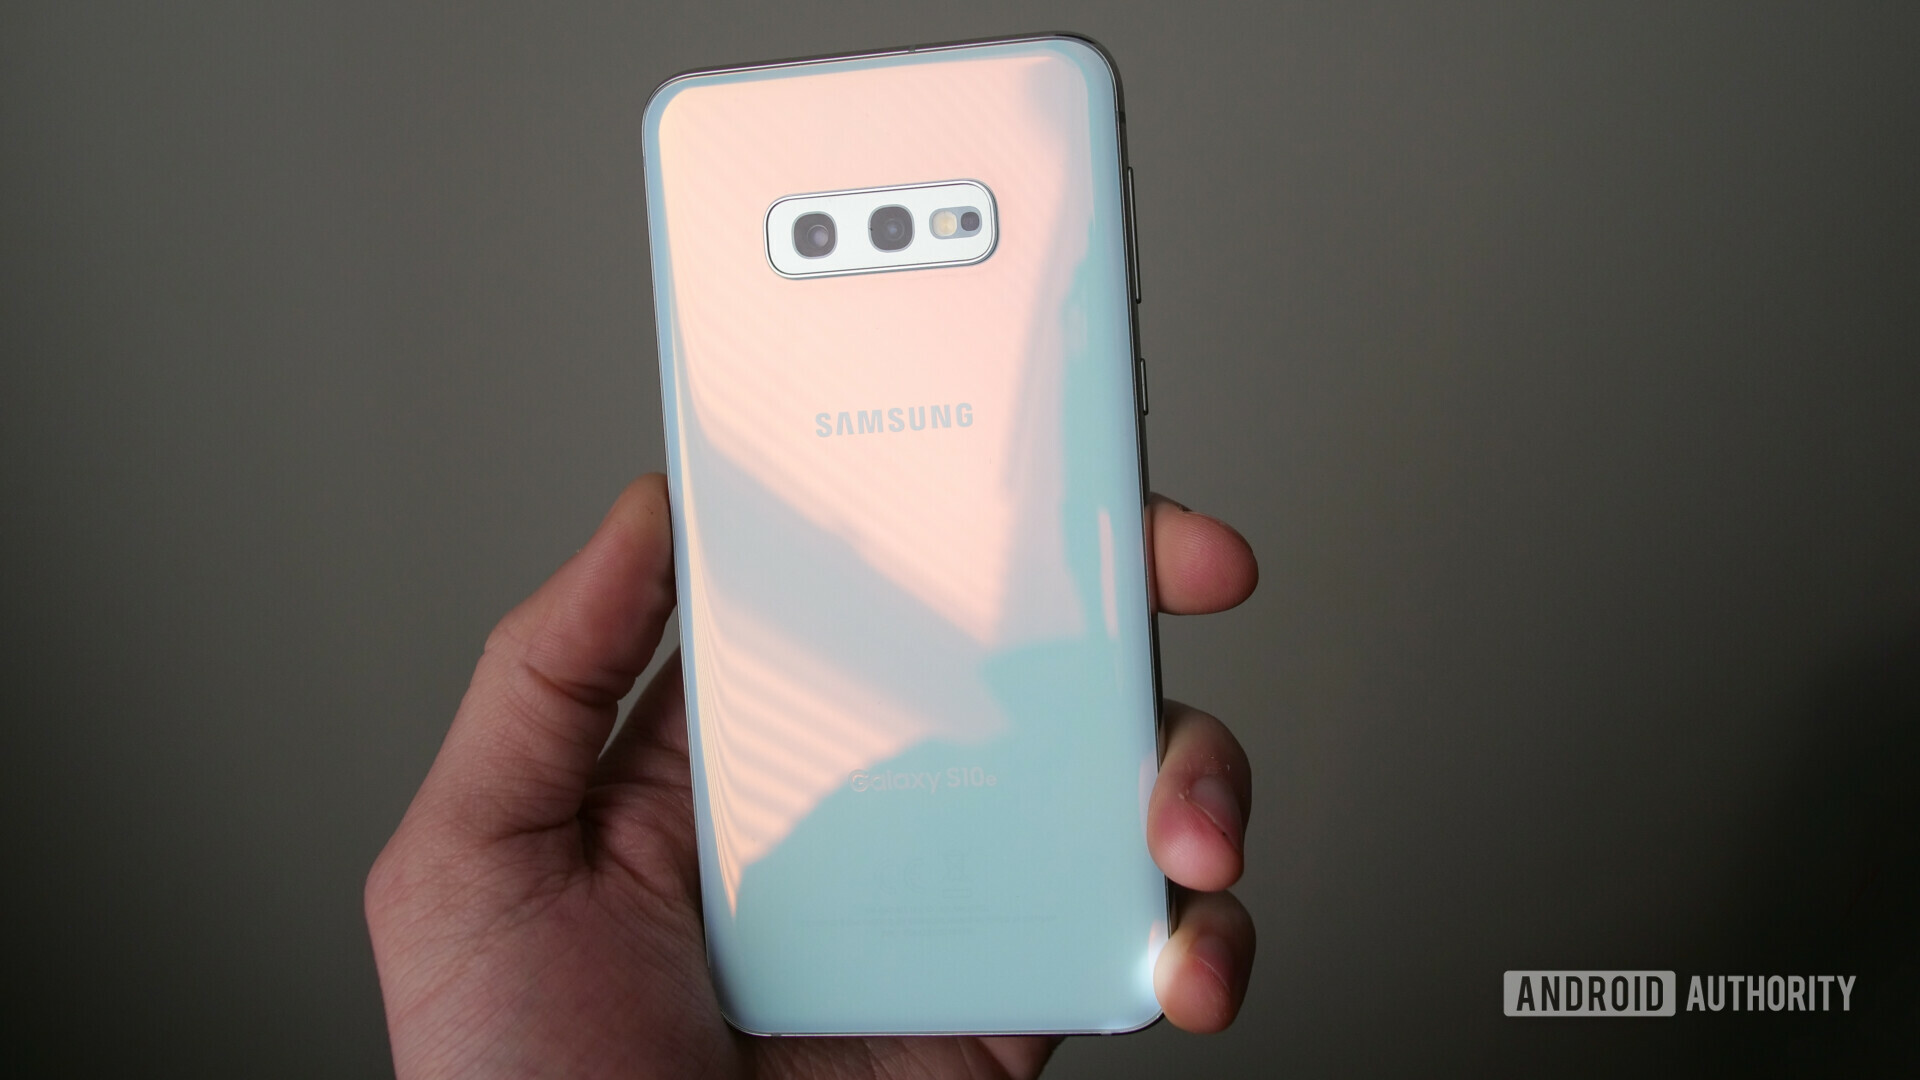 Backside of the samsung galaxy s10e held in hand.